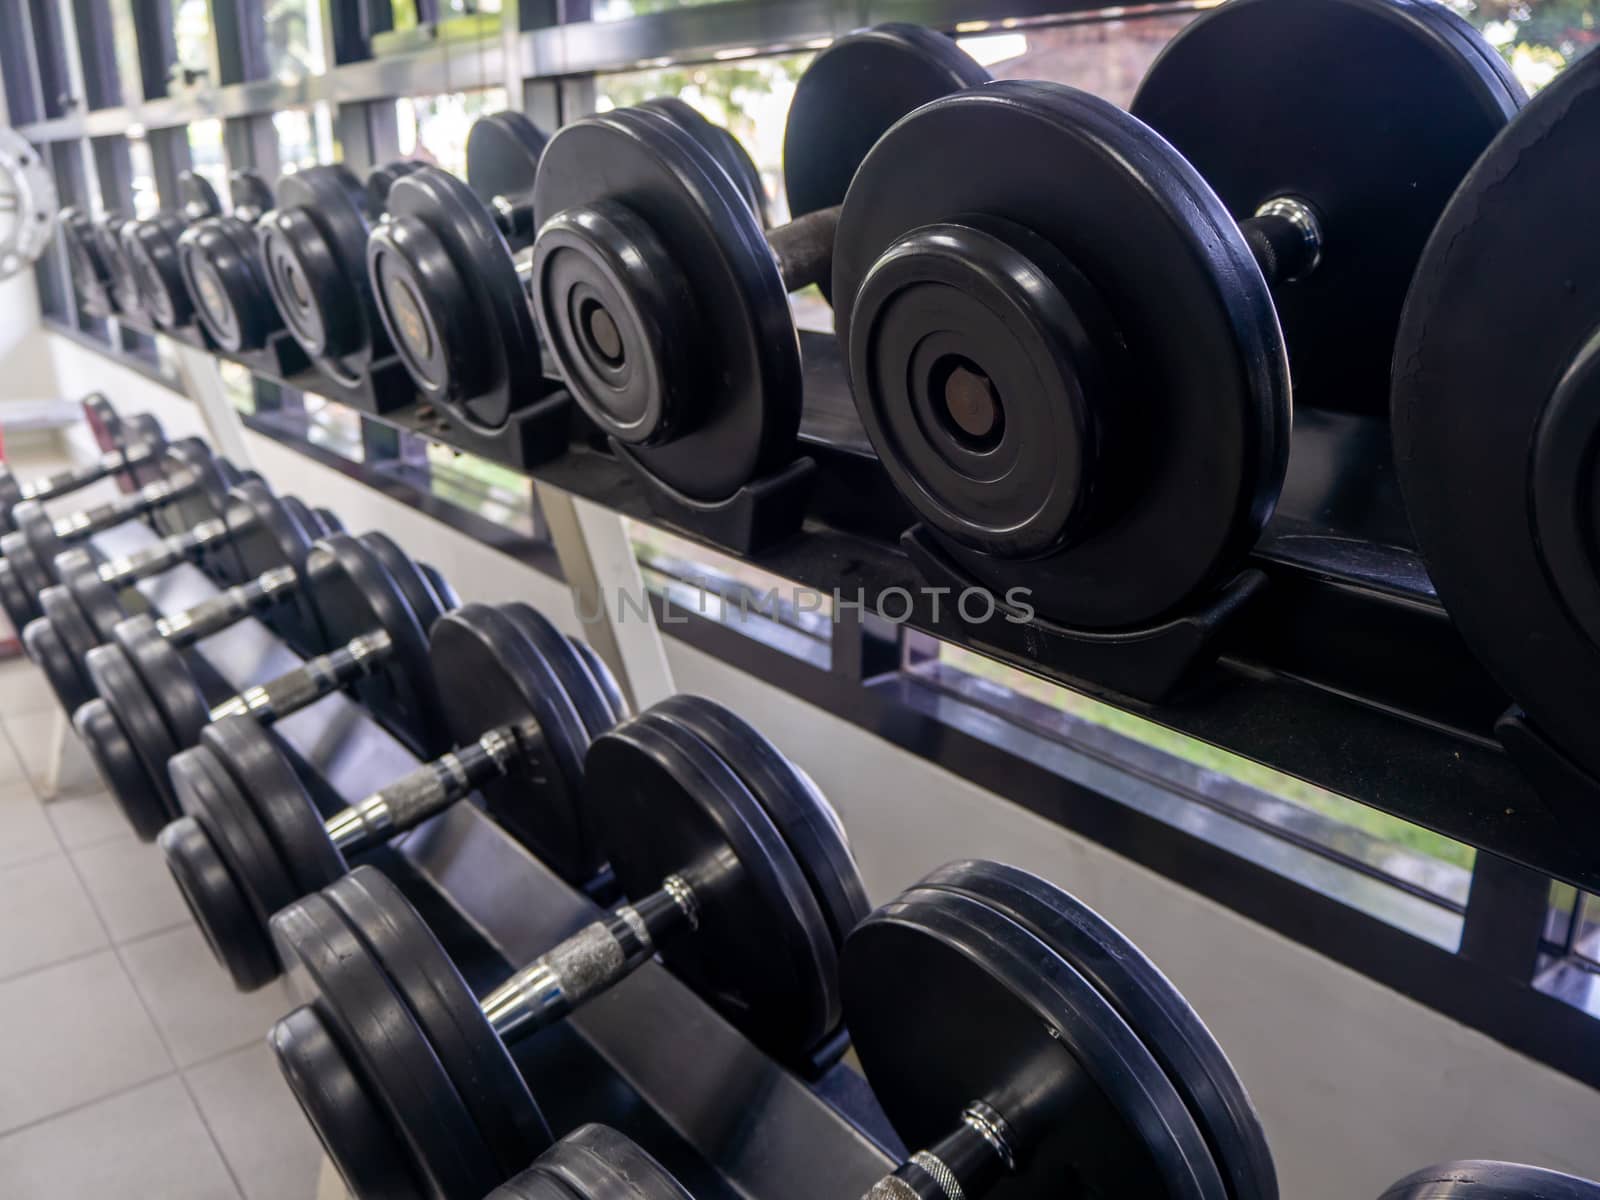 dumbbell set. Close up many metal dumbbells by shutterbird